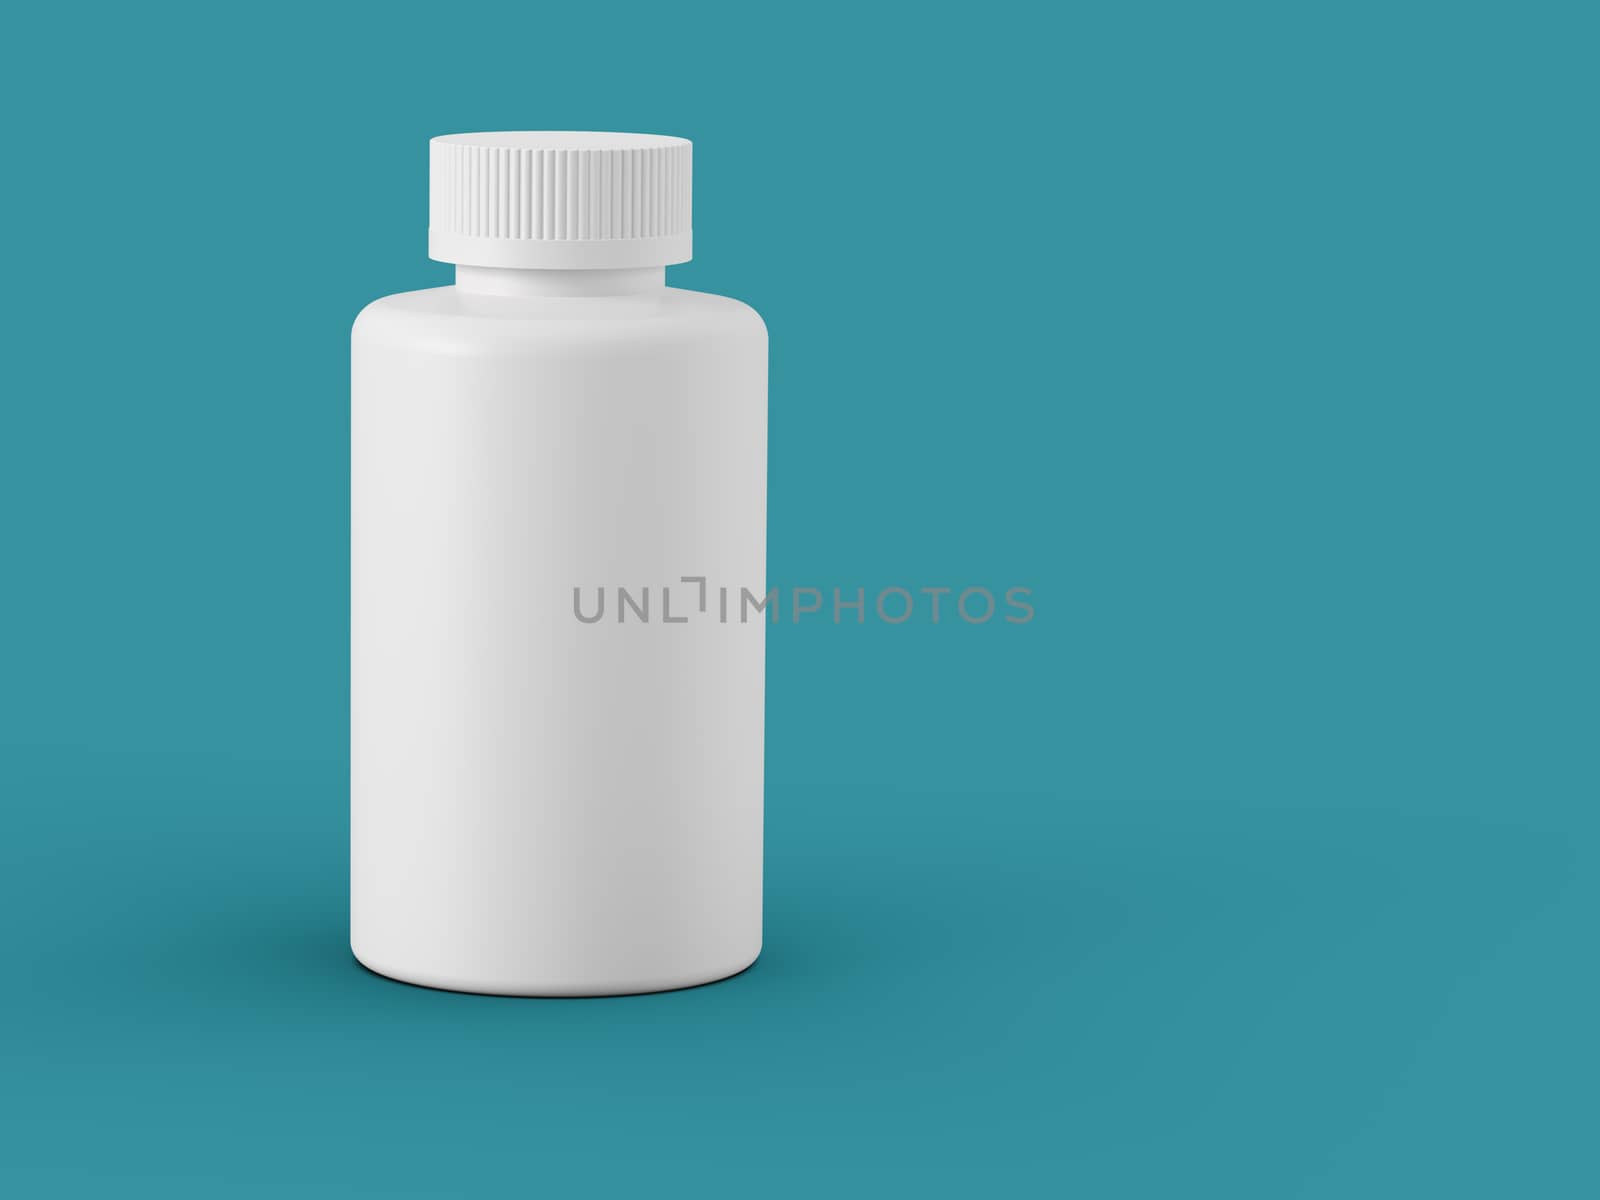 White plastic bottle with copy space over sea green background